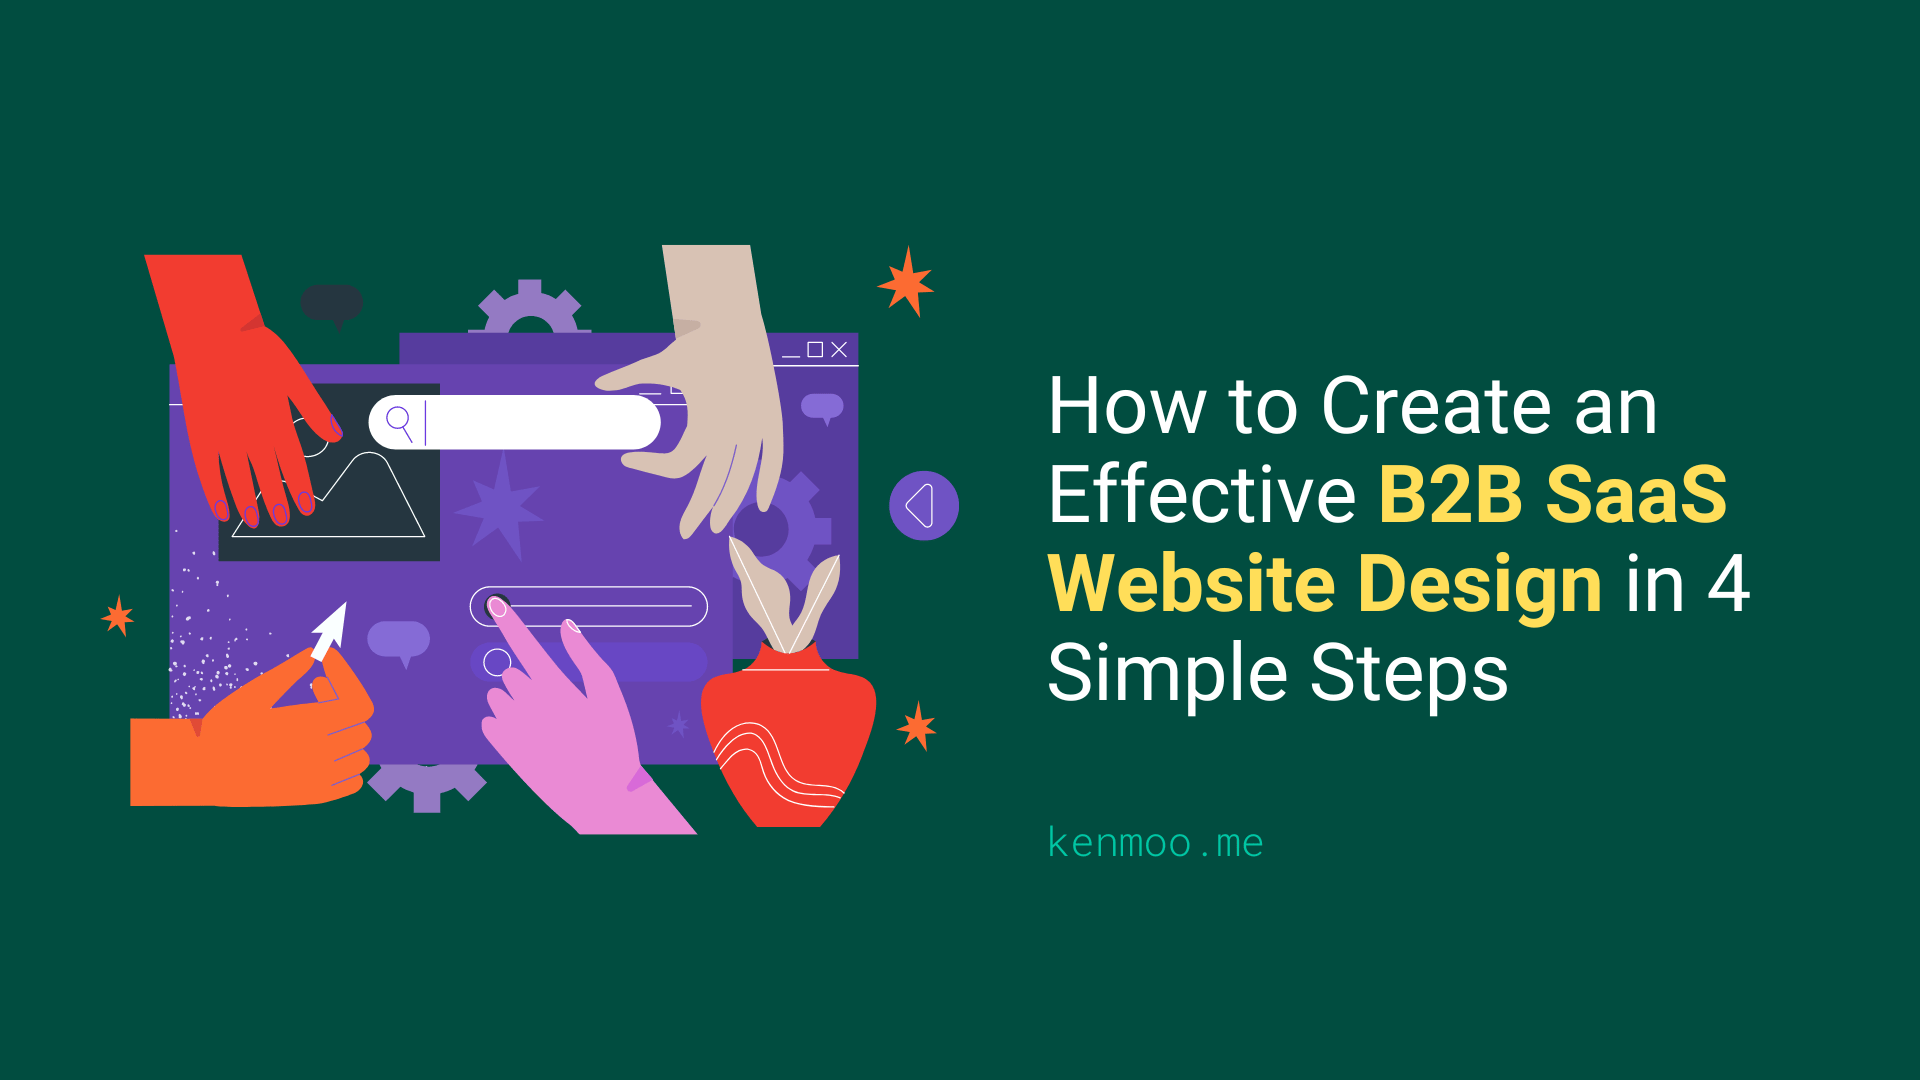 How to Create an Effective B2B SaaS Website Design in 4 Simple Steps